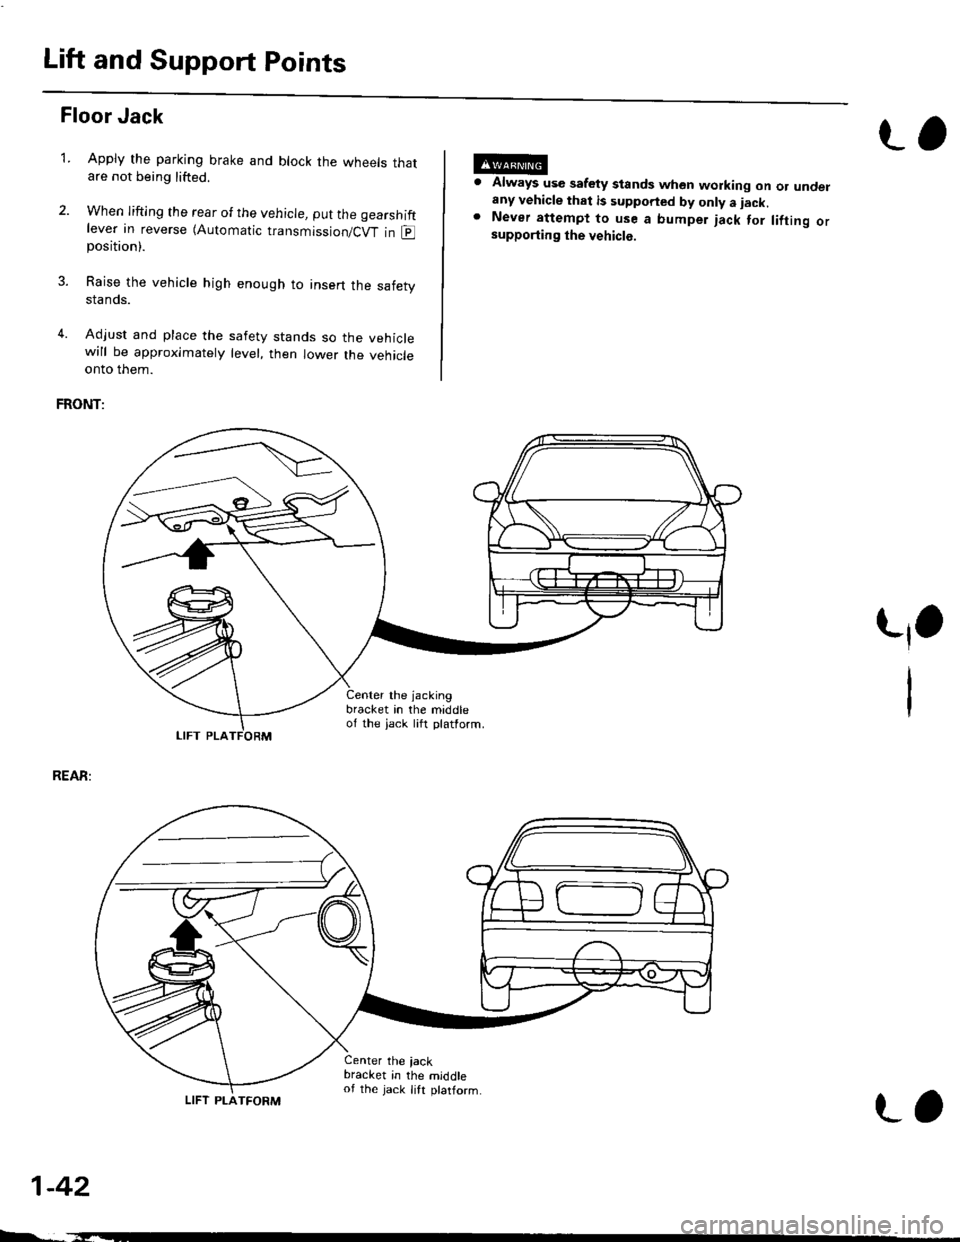 HONDA CIVIC 1998 6.G Service Manual Lift and Support Points
Floor Jack
Apply the parking brake and block the wheets thatare not being lifted.
When lifting the rear of the vehicle, put the gearshiftlever in reverse (Automatic transmissio